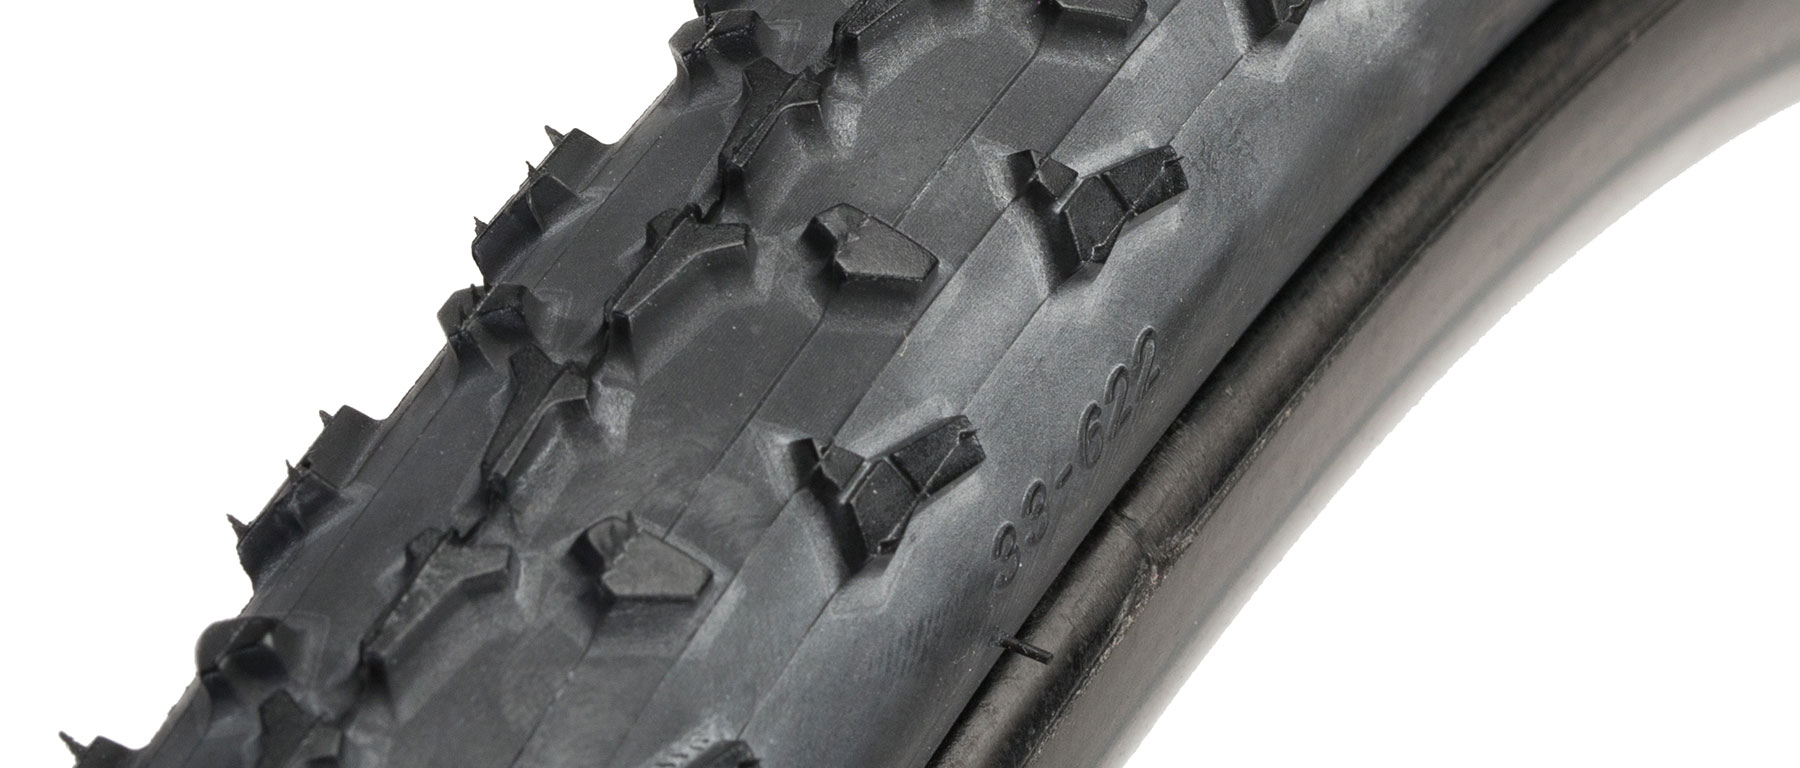 Donnelly PDX  Tubeless Cyclocross Tire